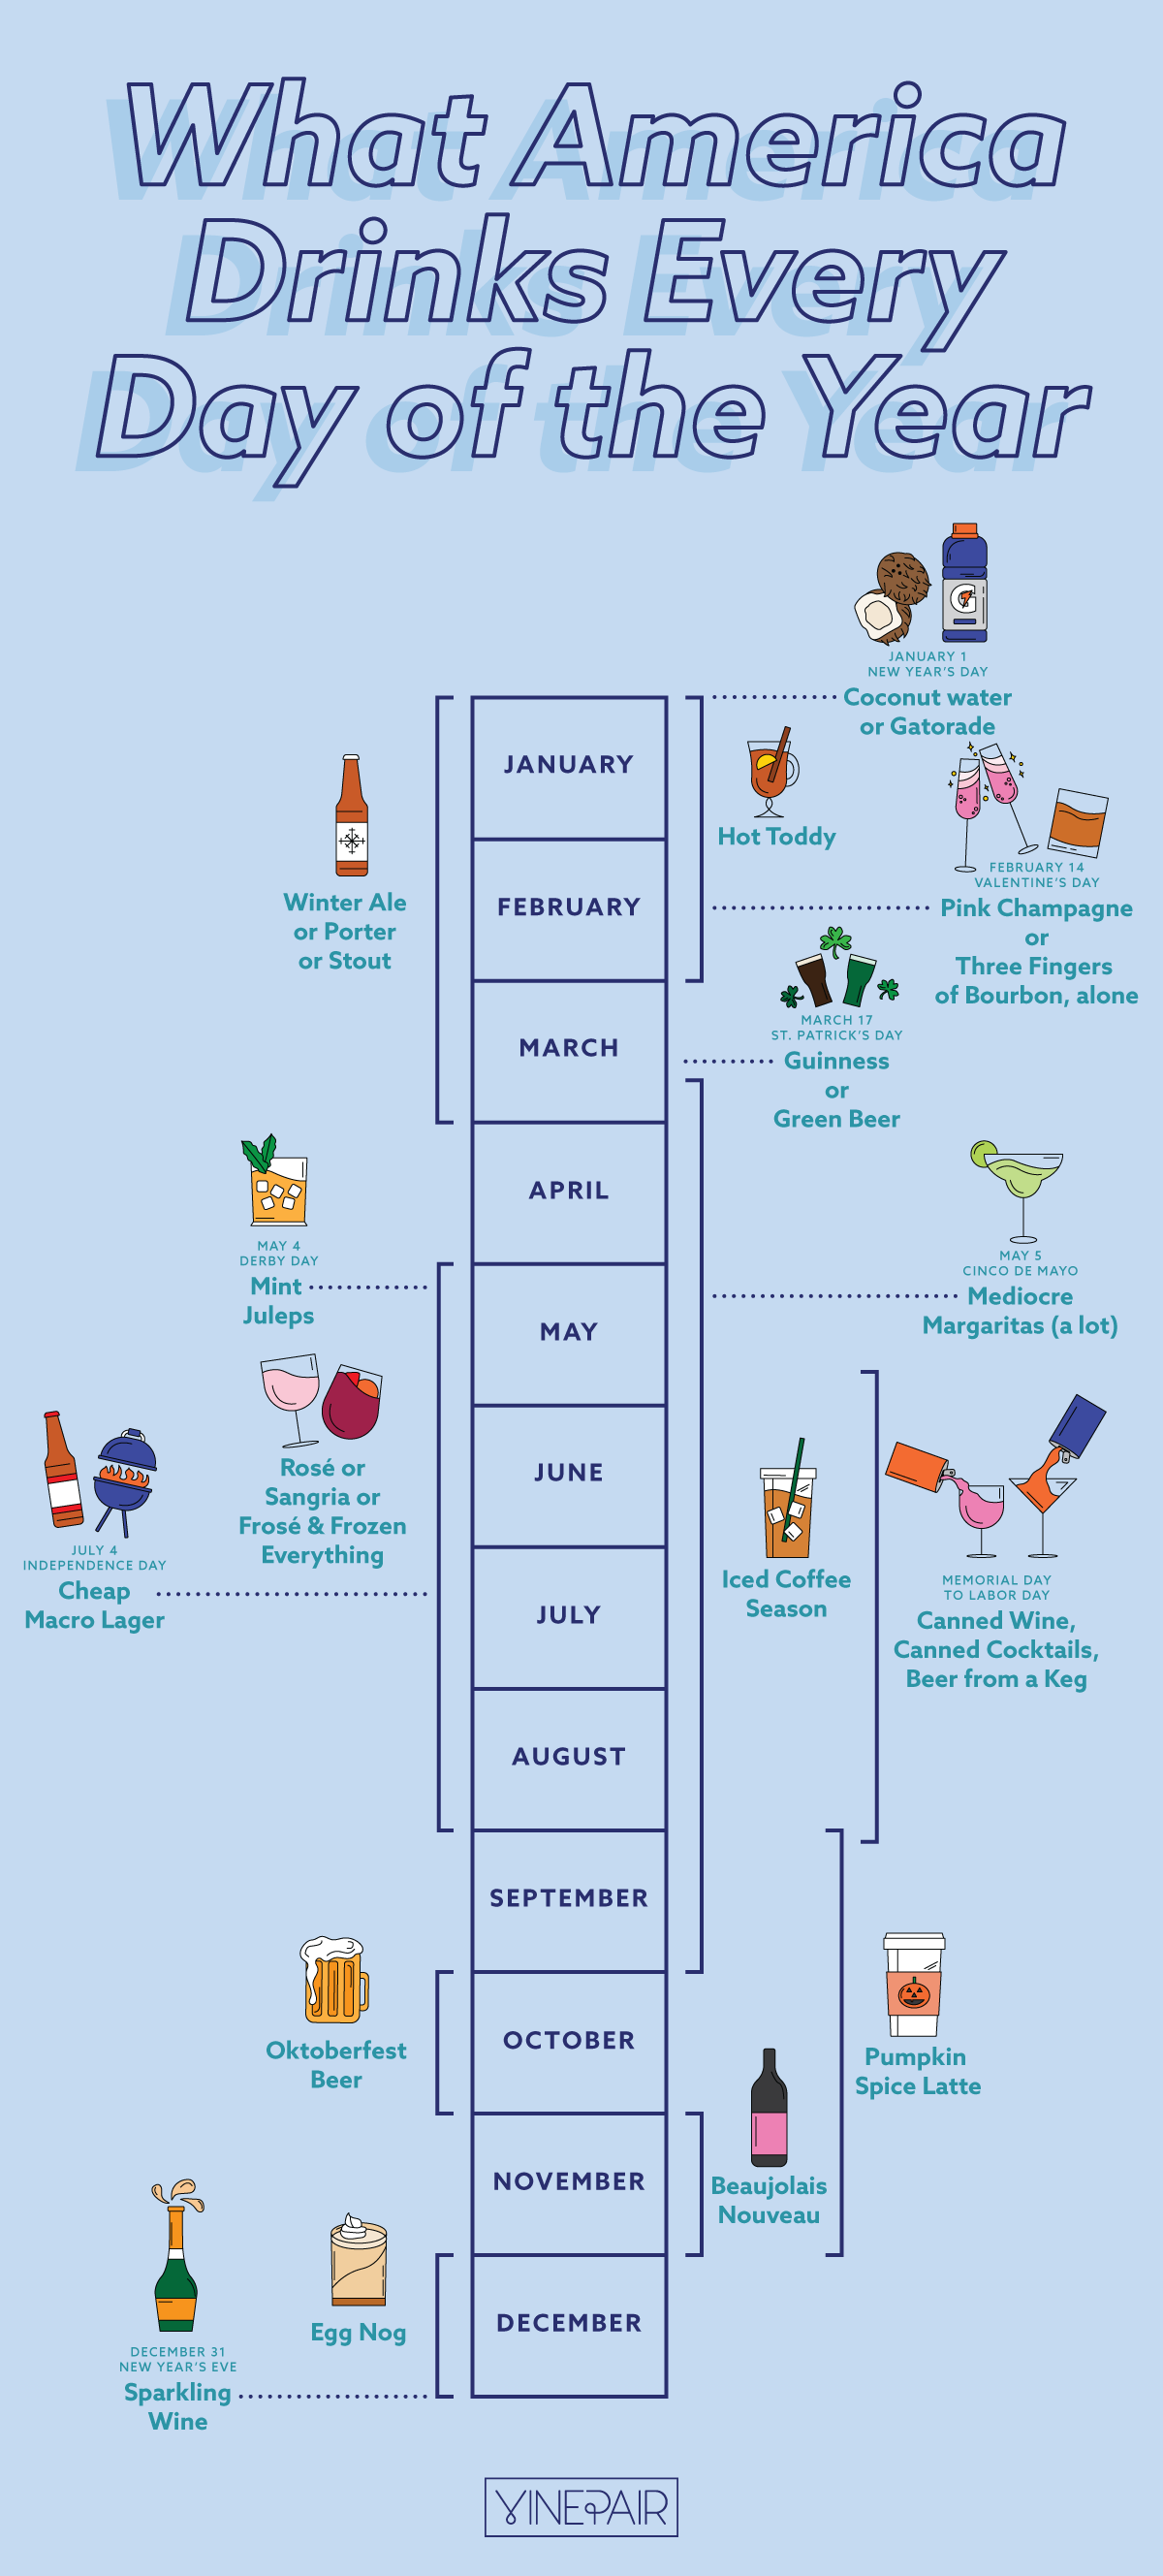 What America Drinks Every Day of the Year